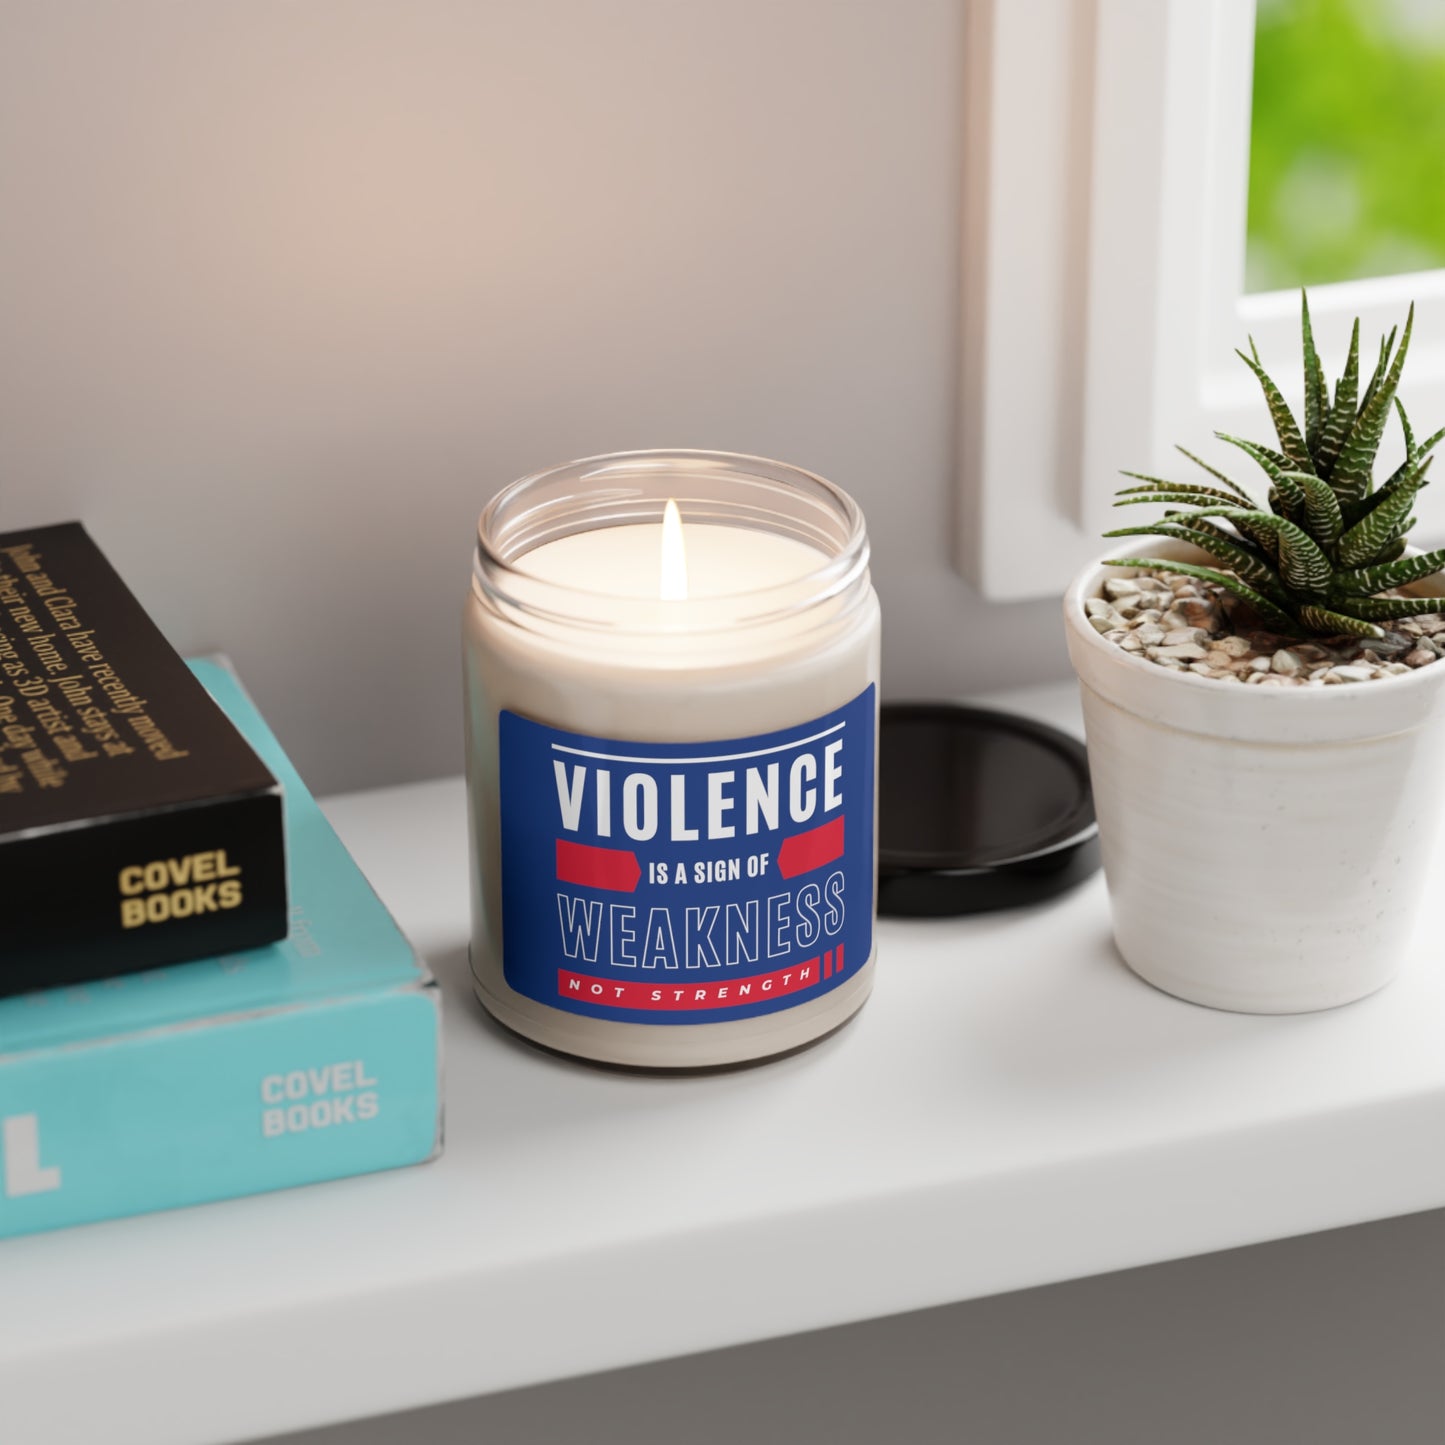 Scented soy candle with a powerful message: Violence is a sign of weakness, Not Strength